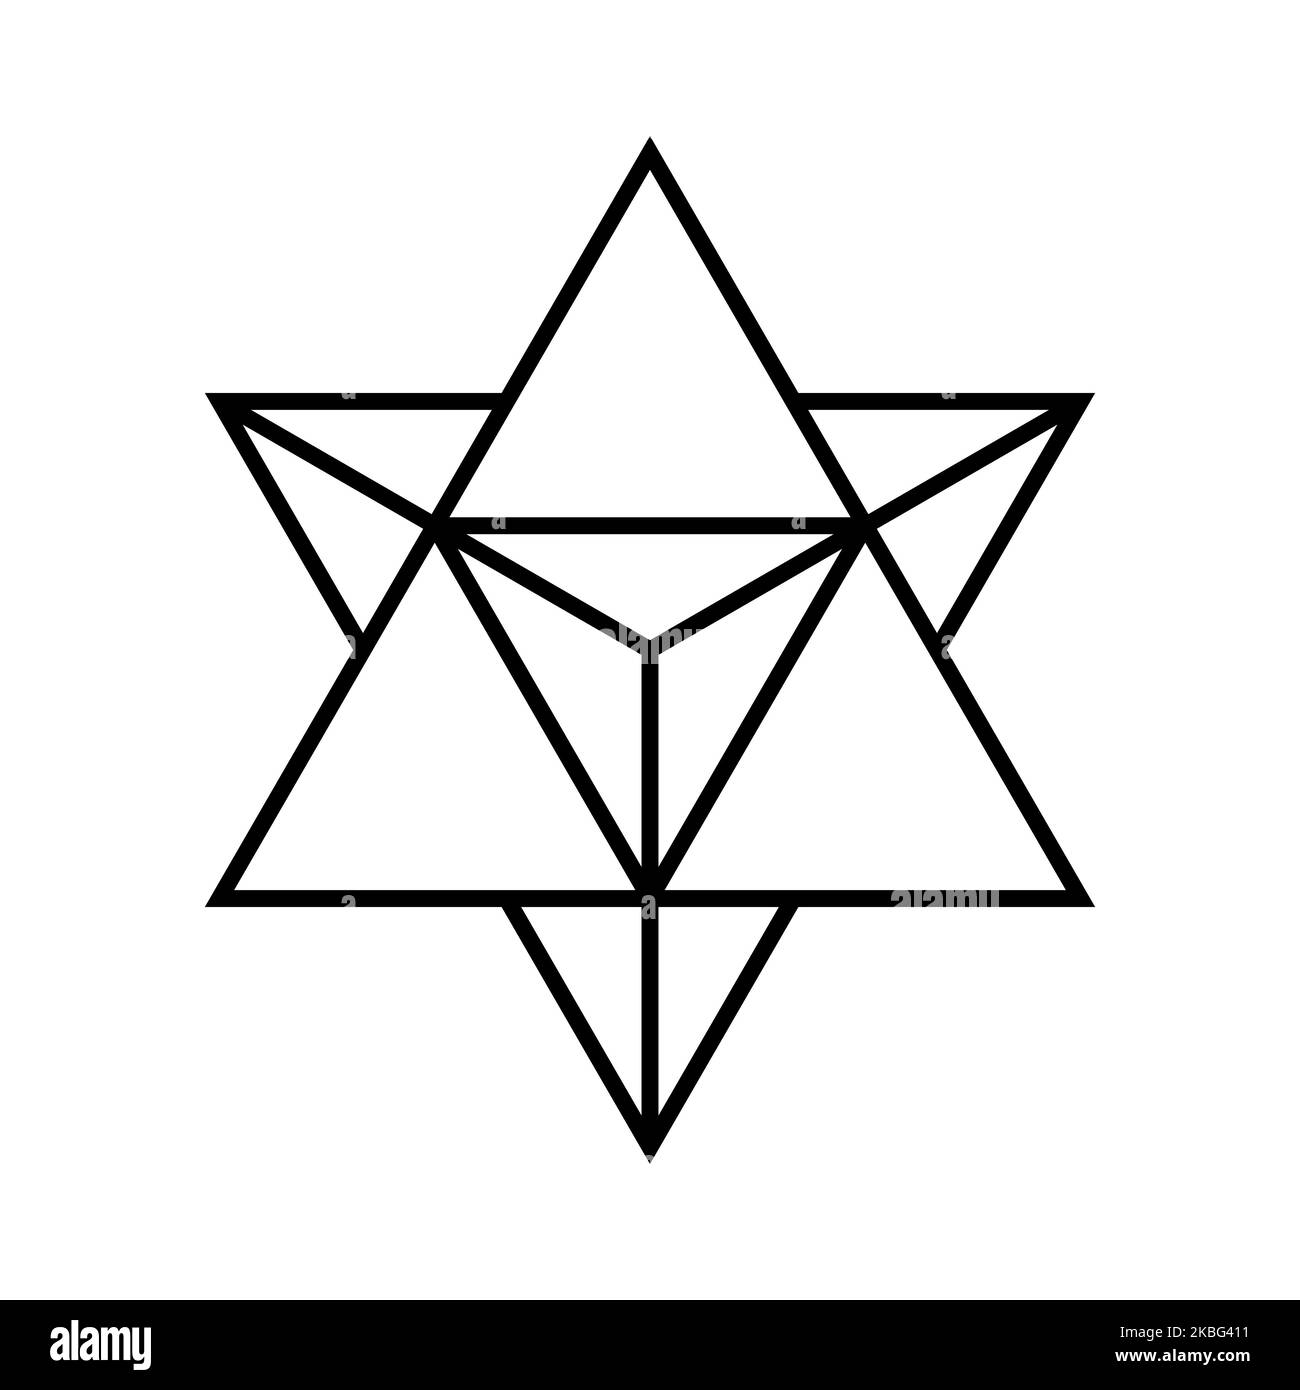 Merkaba symbol. Sacred geometry shape. Star tetrahedron. 3D object that is made out of two triangles facing opposite directions. Vector illustration. Stock Vector